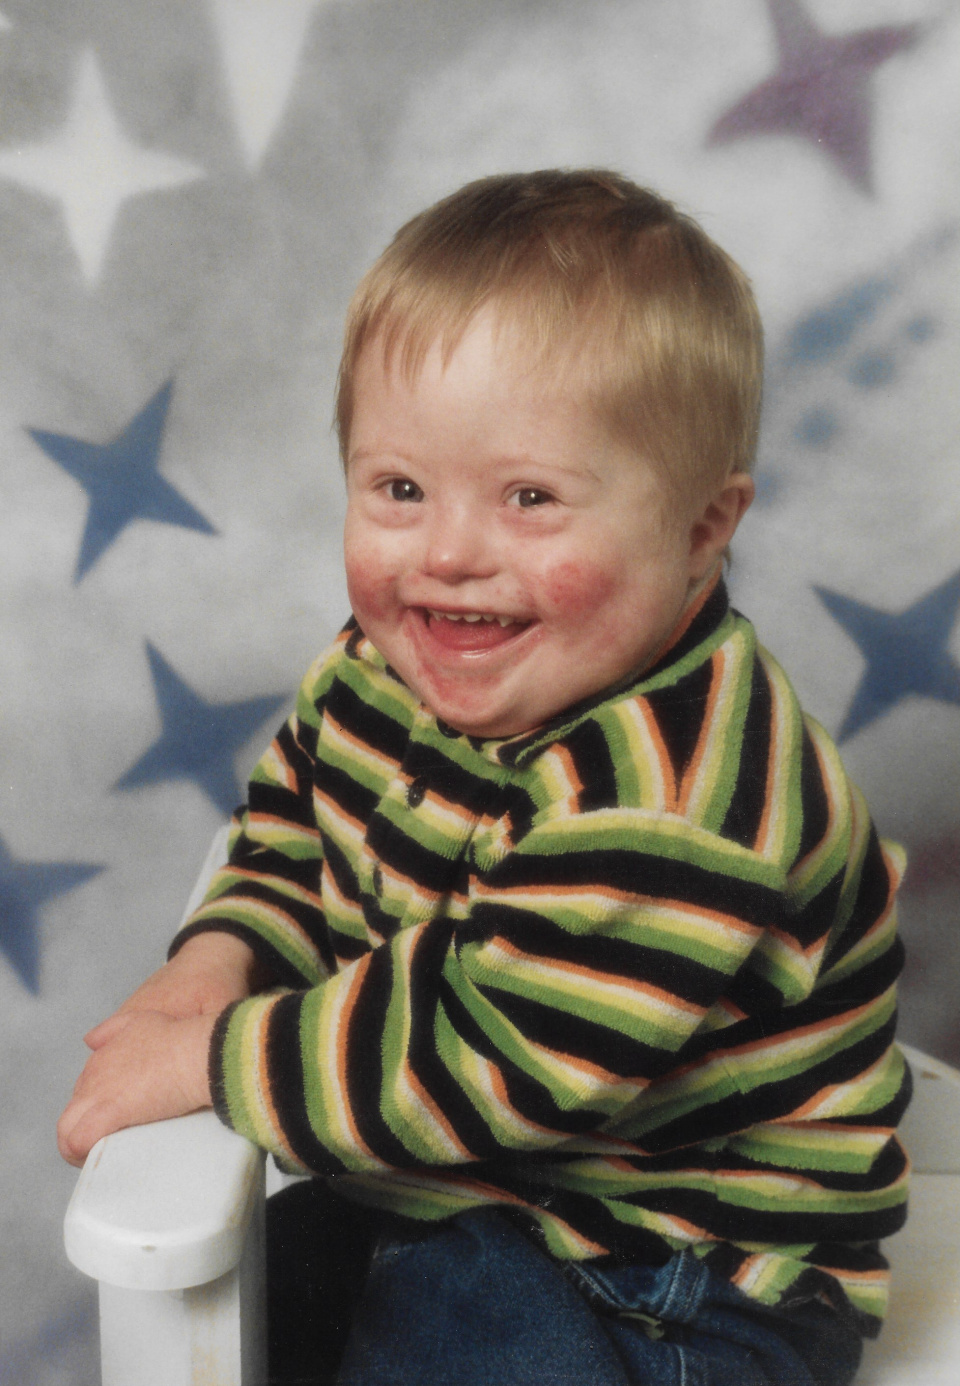 A smiling cheery toddler. Tom was a little boy who just happened to have Down's syndrome